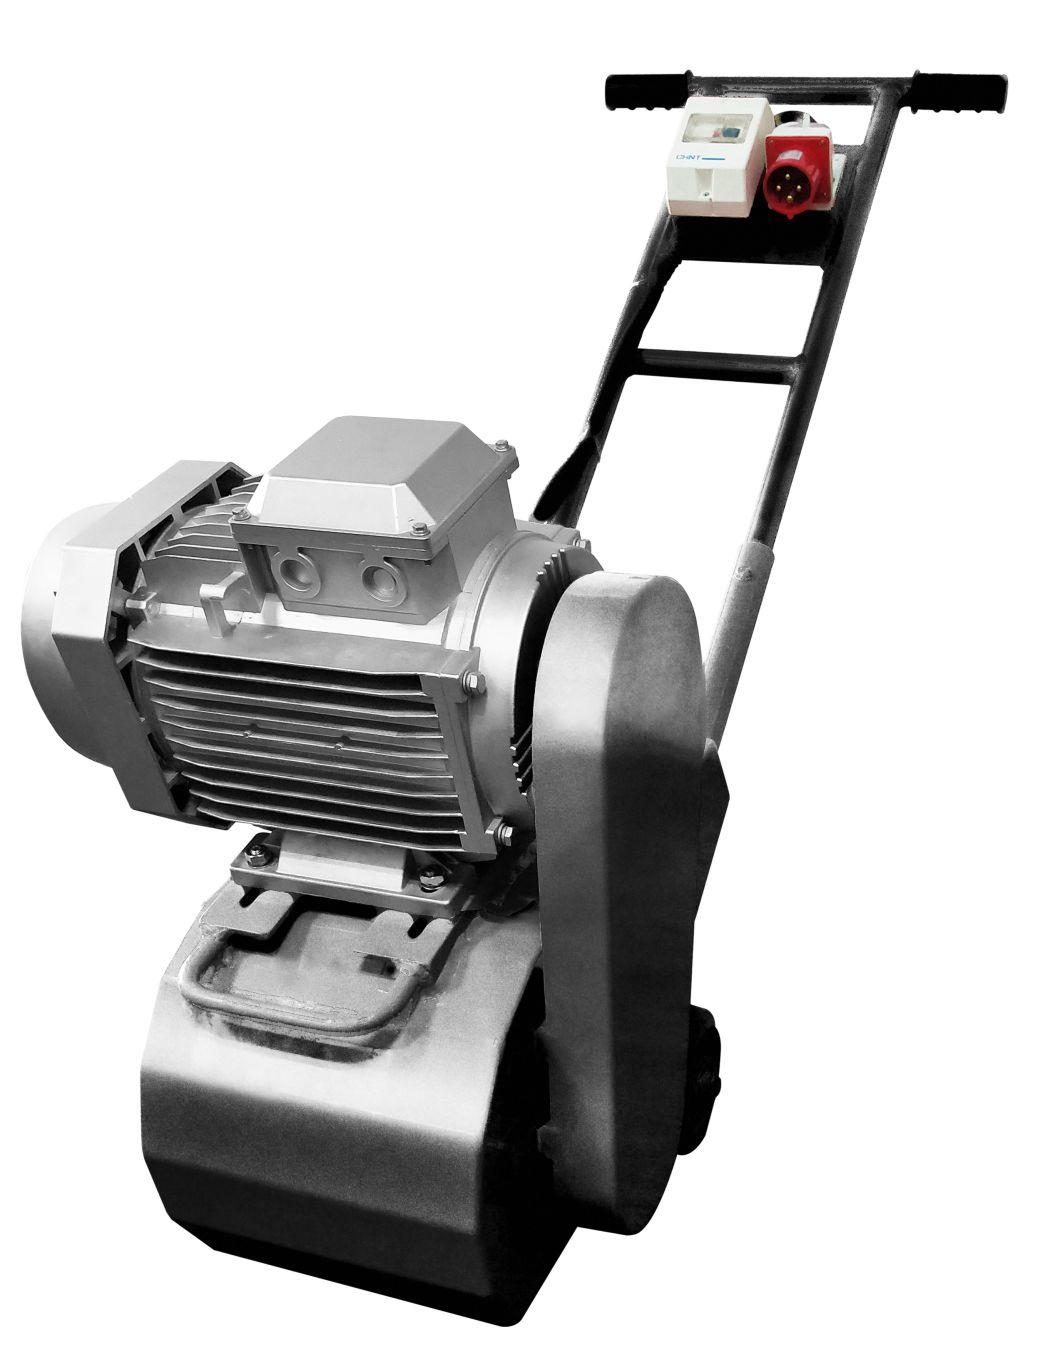 DECK SCALERSHIPYARD MACHINEELECTRICAL DECK SCALER FOR REMOVING RUST IMPA CODE: 591205 RS-2000